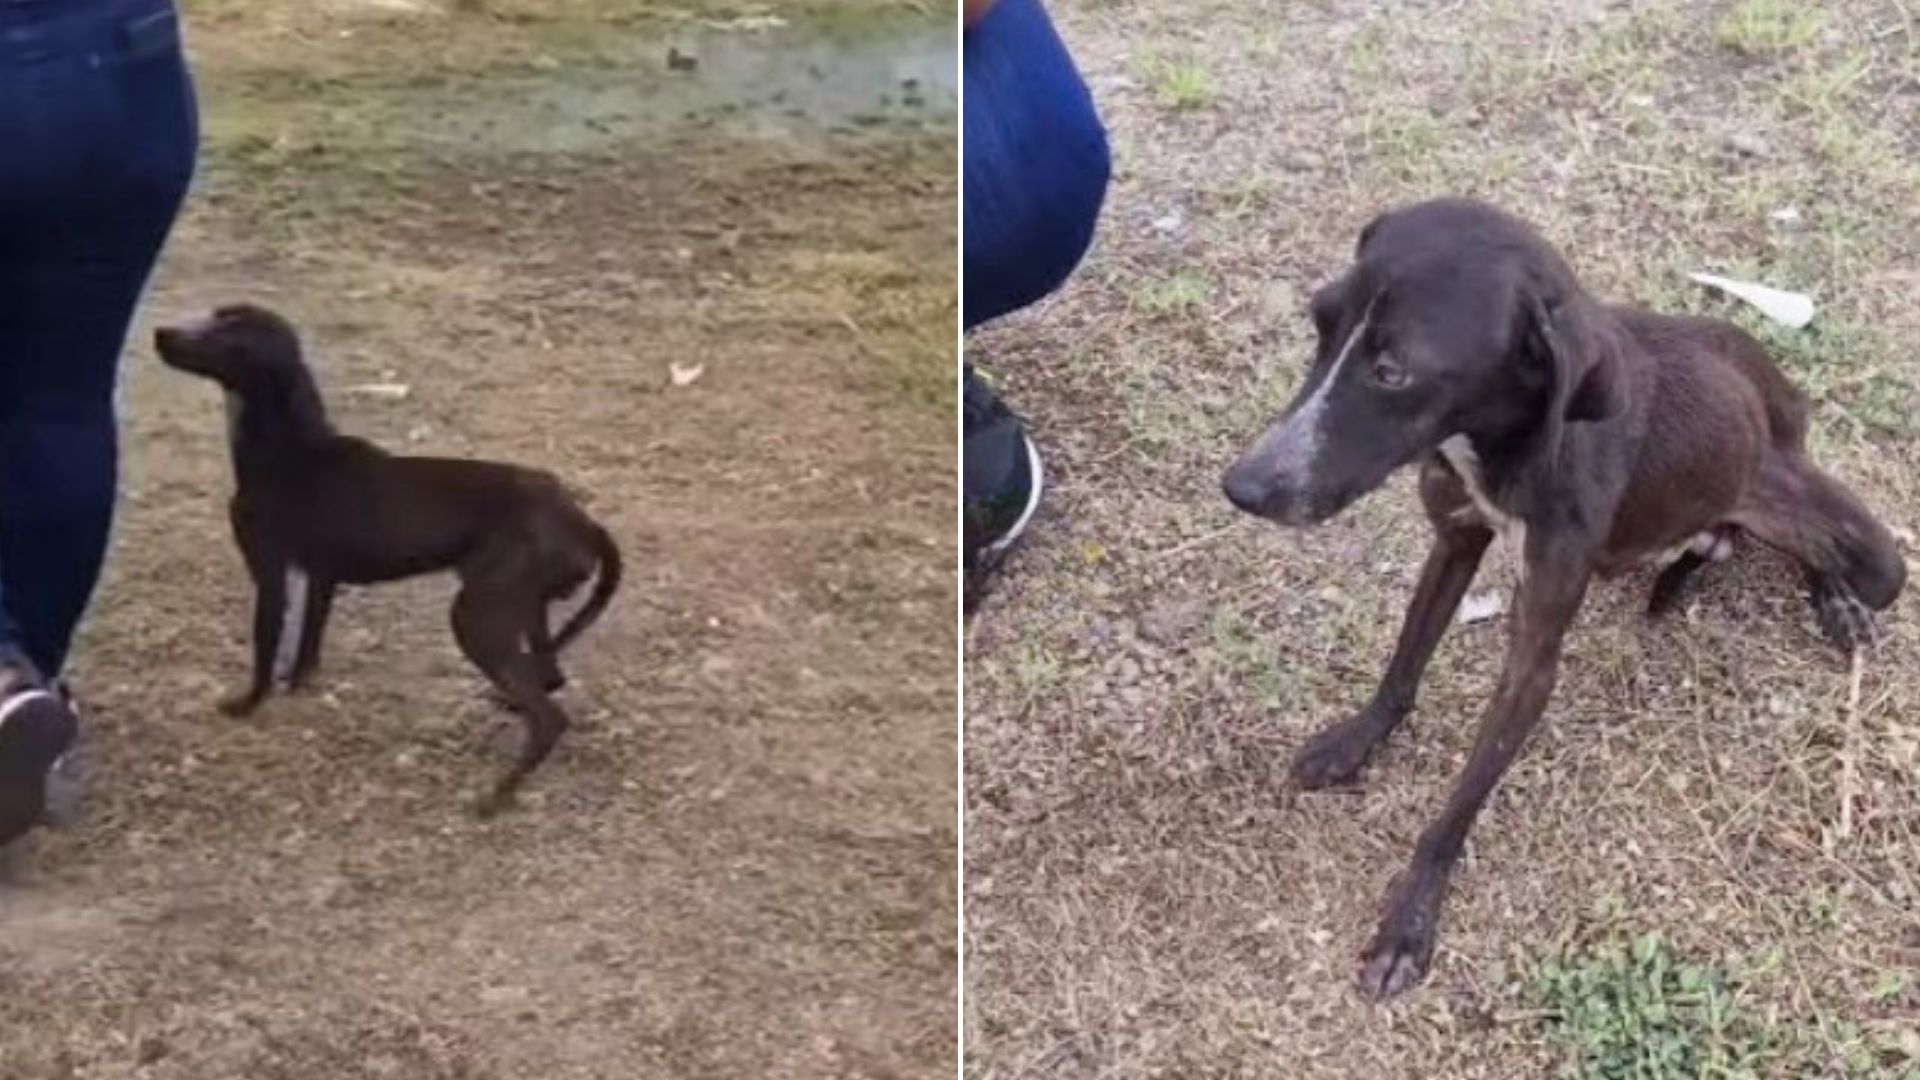 Owner Abandoned His Dog Because He ‘Chased Chickens’ But A Kind Rescuer Rushed To Help Him